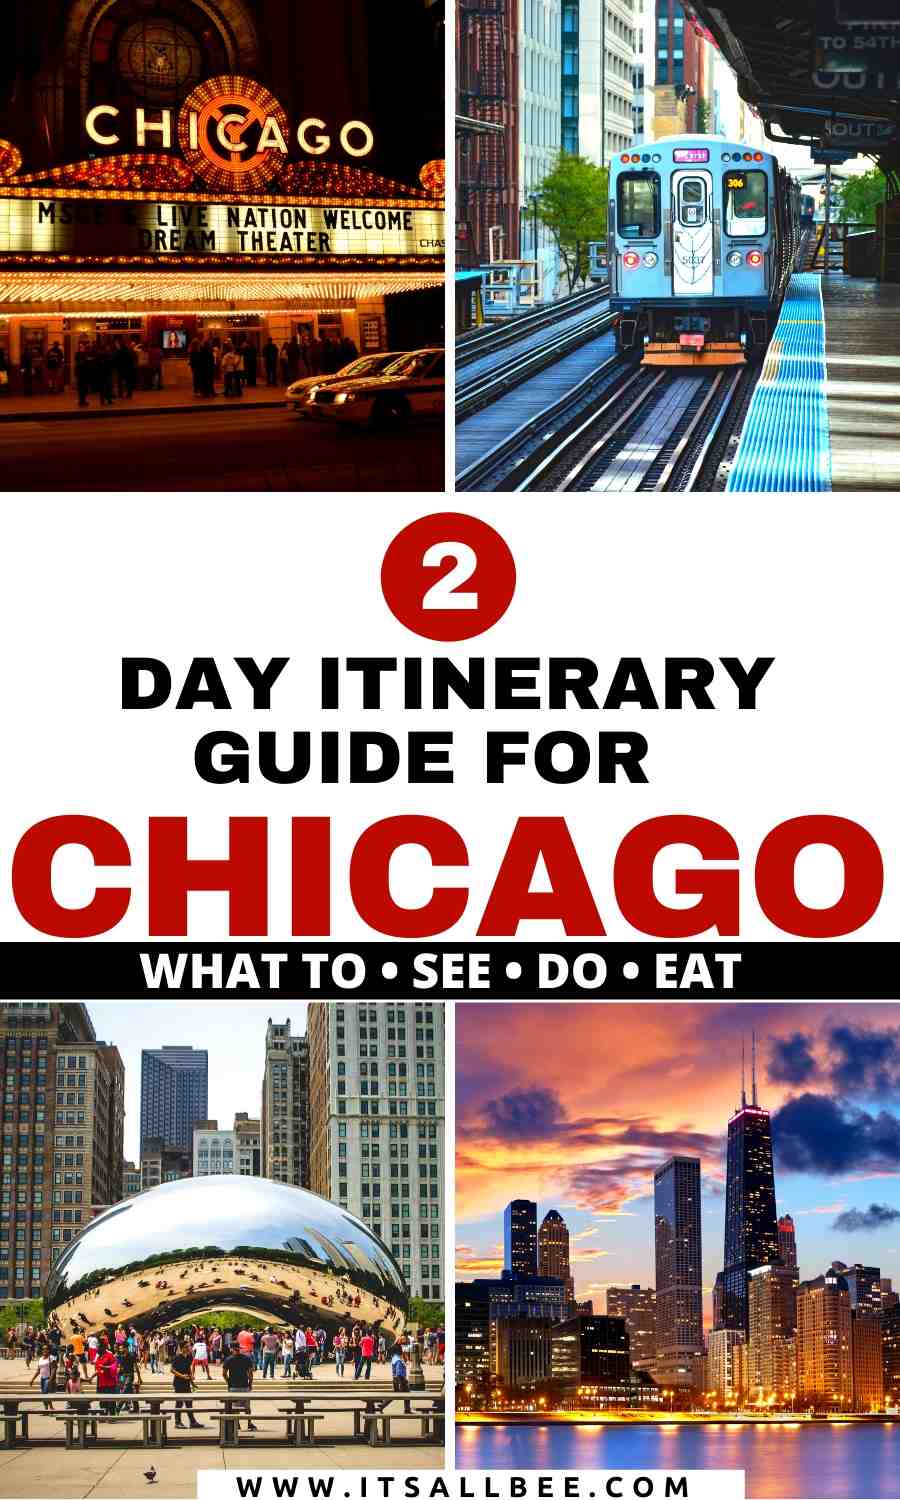 what to see and do in Chicago in 2 days - an itinerary guide